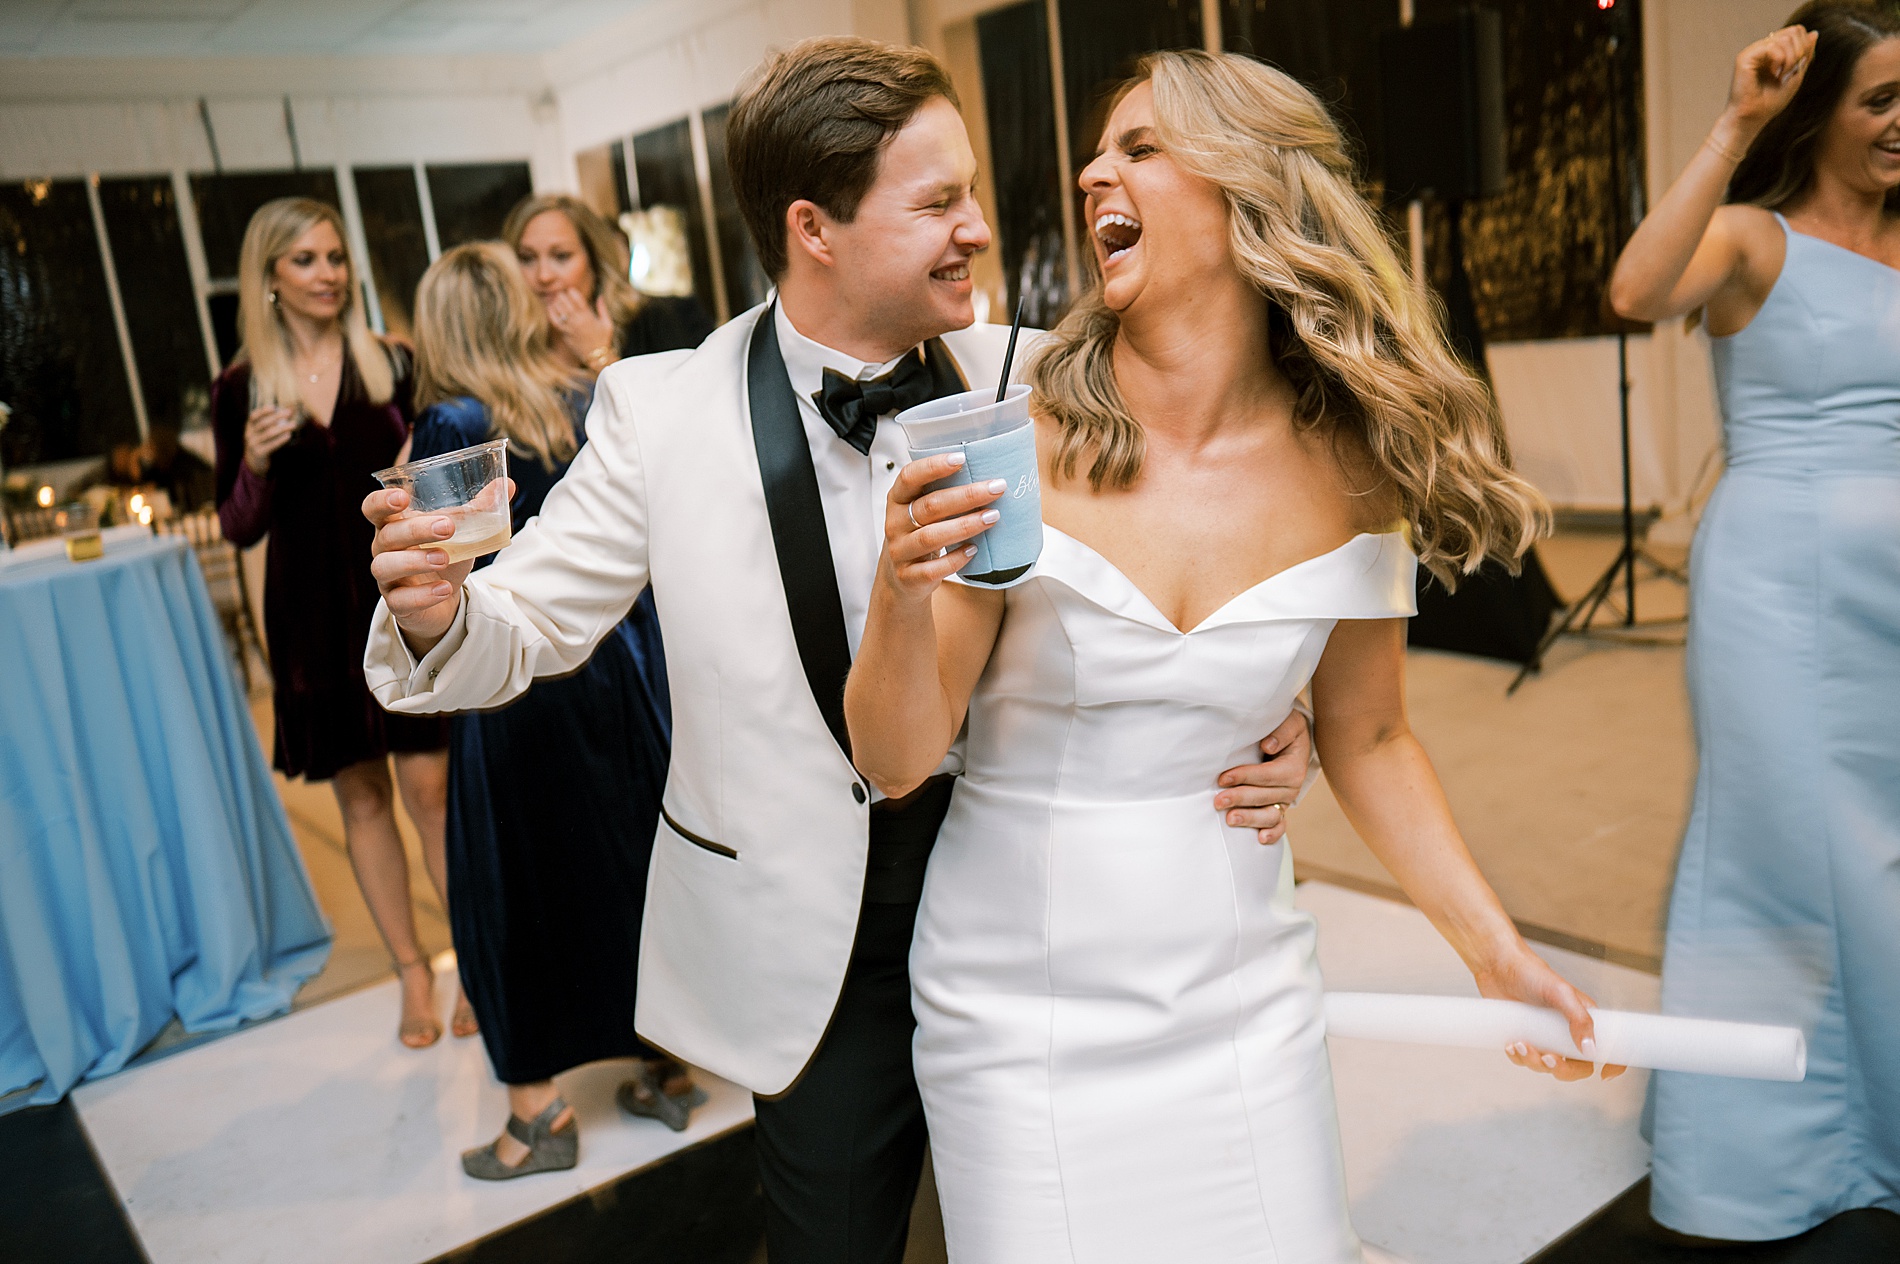 cnadid portraits of newlyweds laughing together during wedding reception